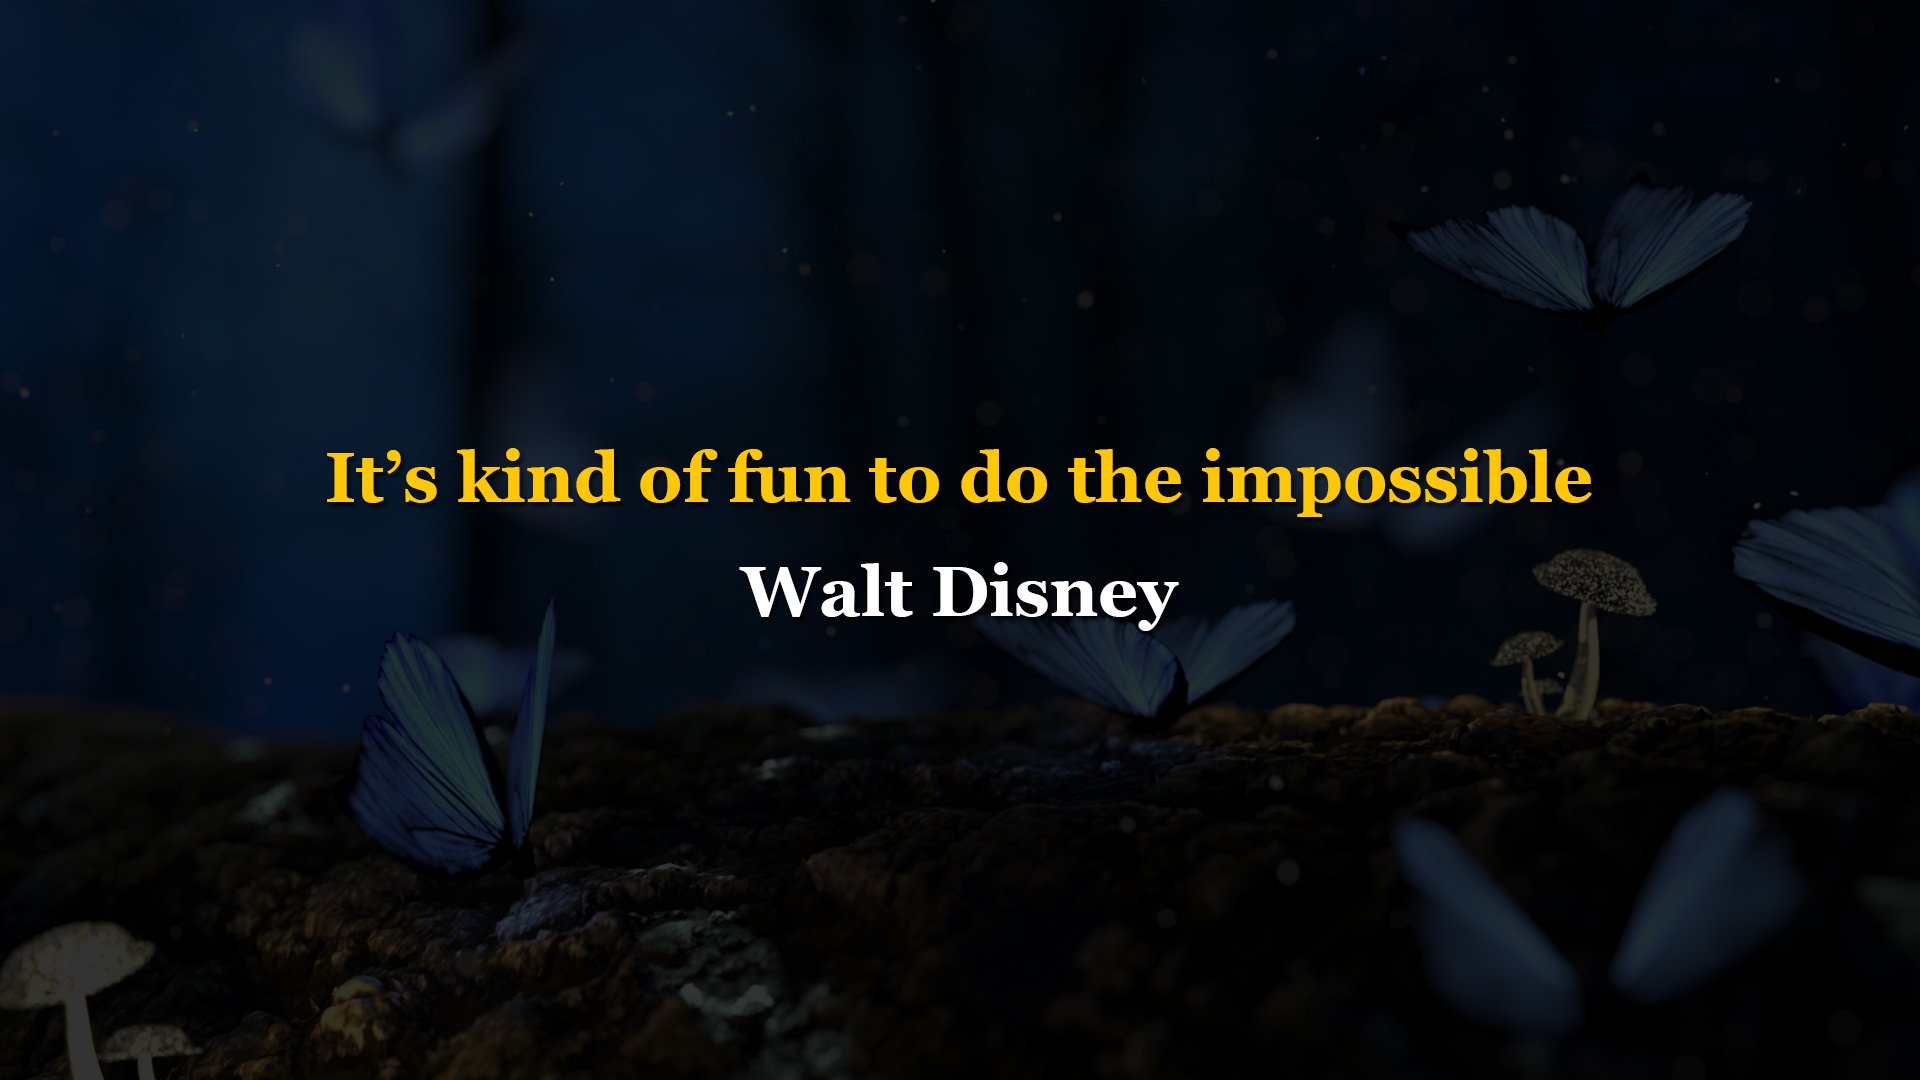 HD Wallpaper Disney Quotes 1080P Picture #Walt #Disney #Quotes #Inspirational #InspirationalQuotes #MotivationalQuotes #Fun #Kind #Impossible #Motivational #desktop #photooftheday #Background #amazing #awesome